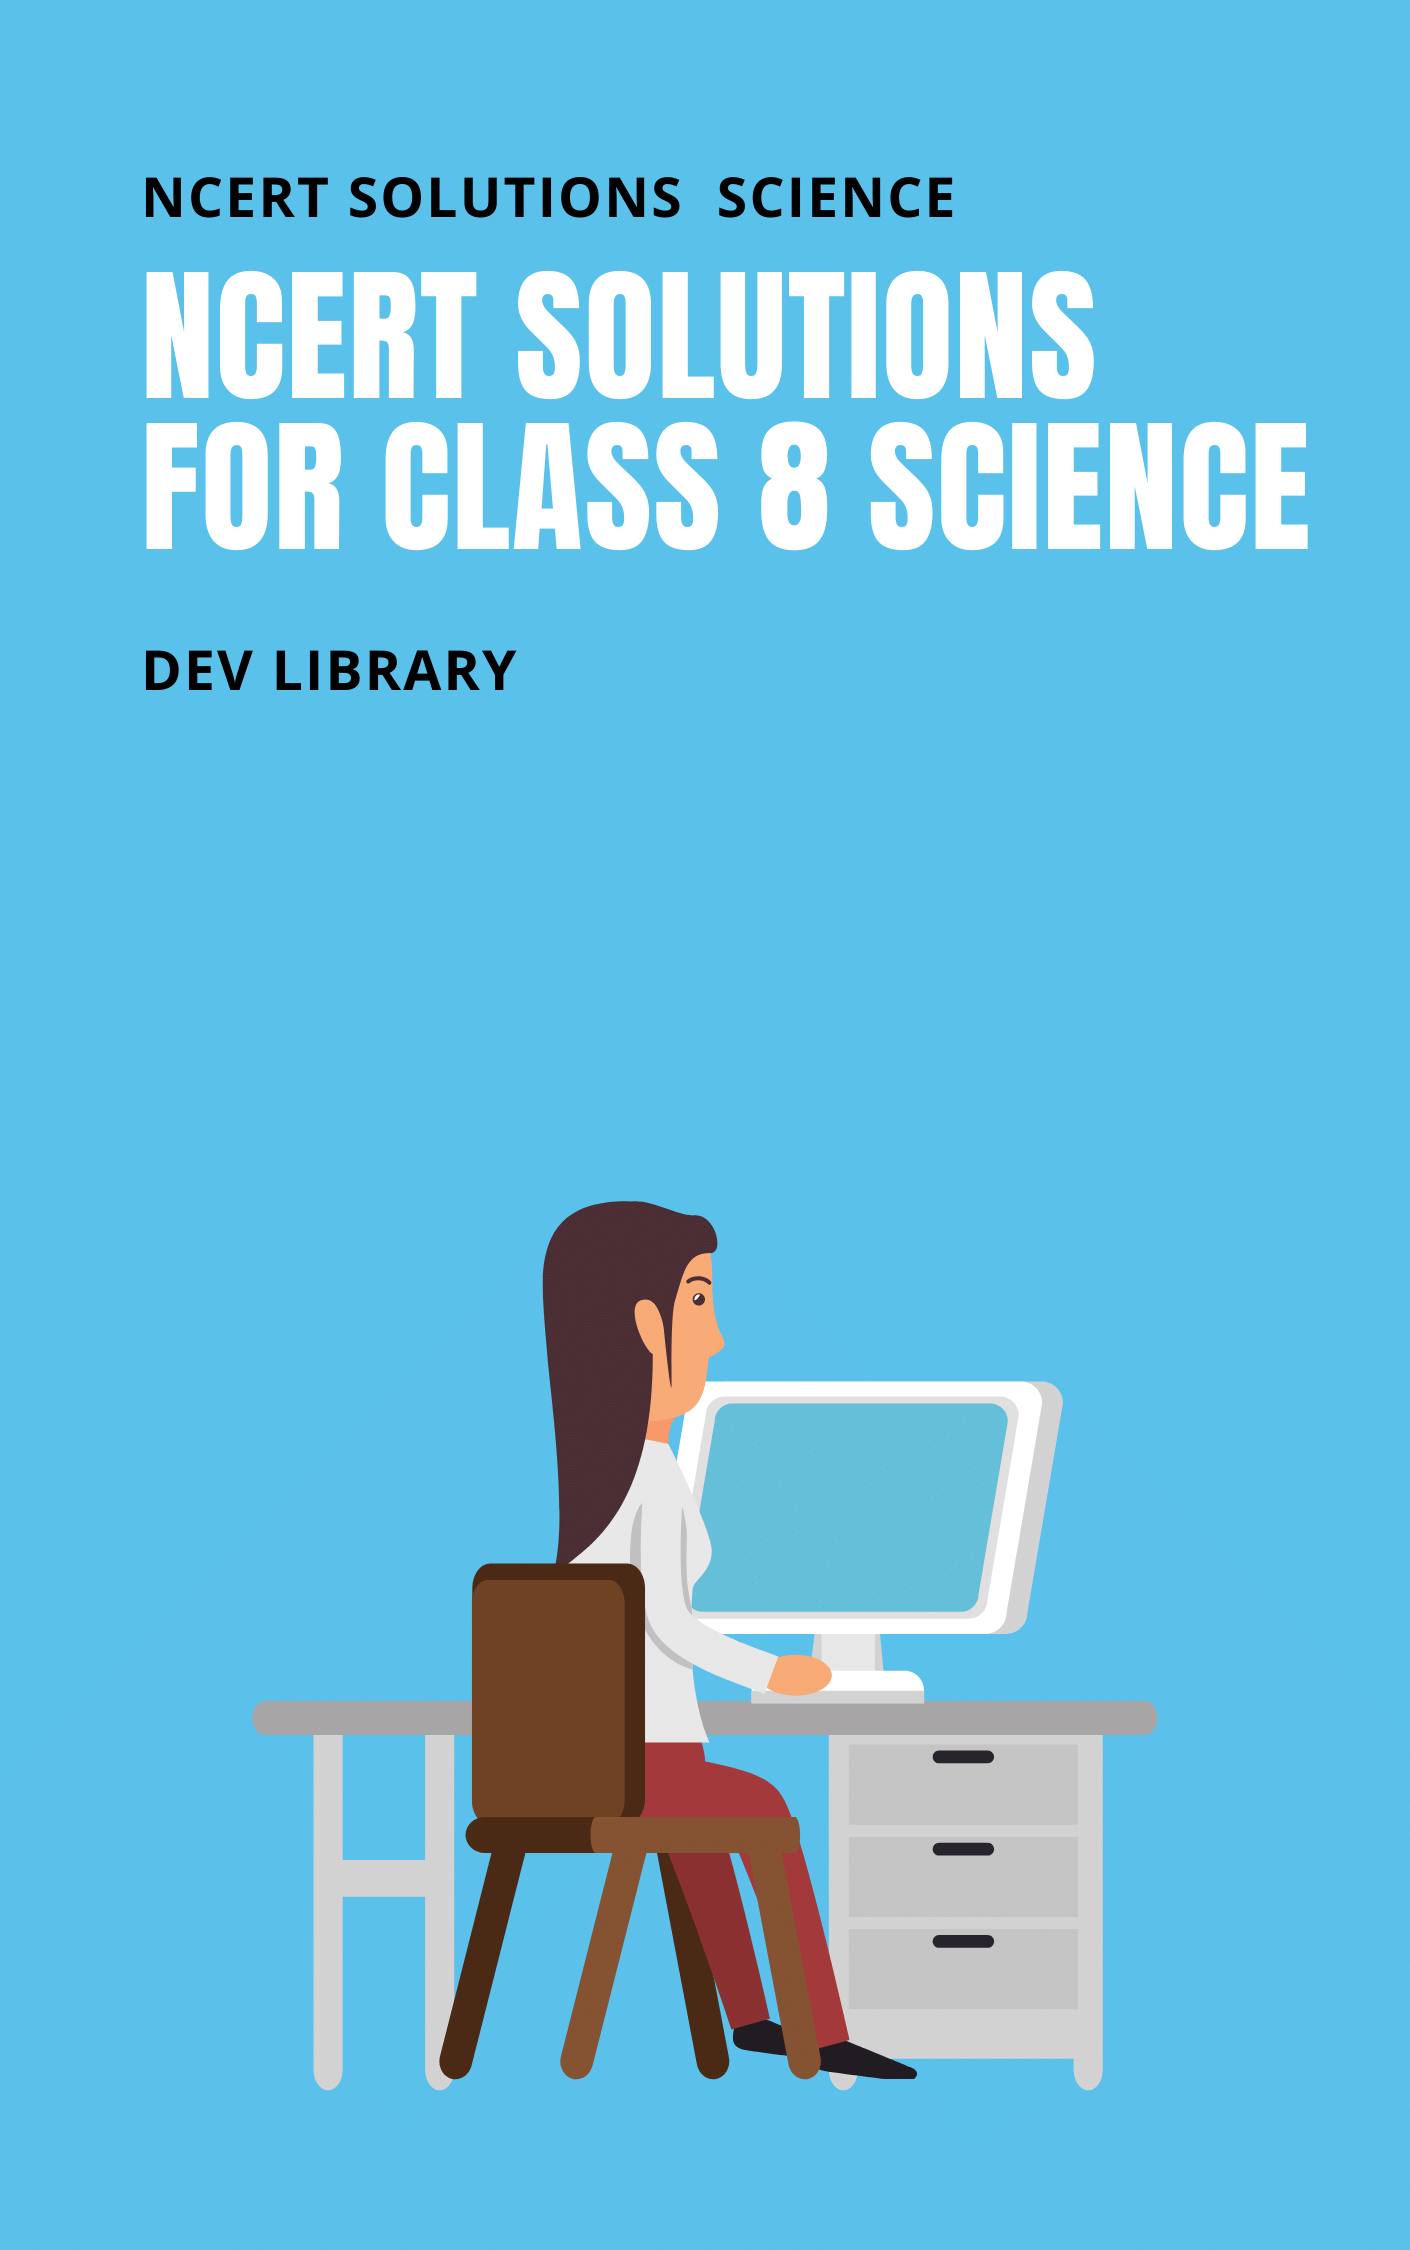 NCERT Solutions For Class 8 Science In Hindi/English - Dev Library